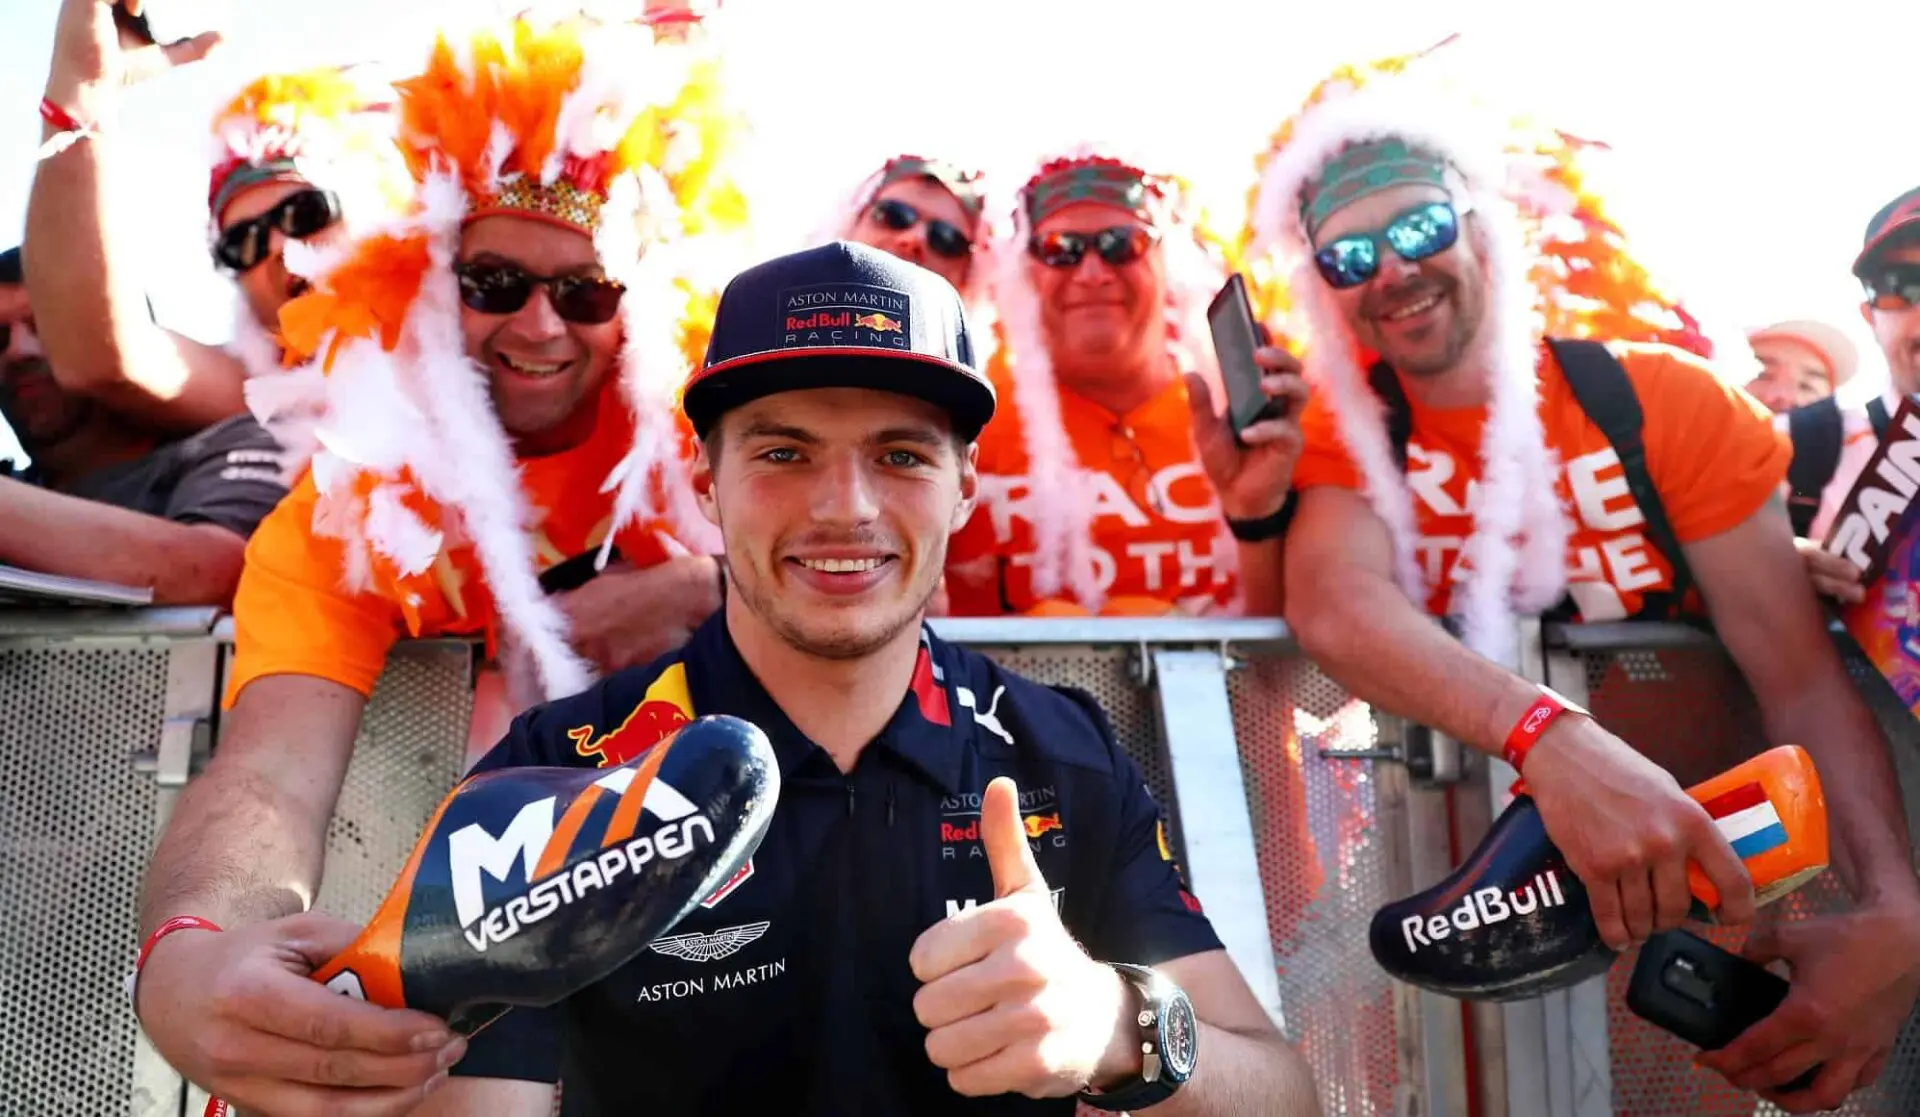 Max Verstappen posing infront of the camera with fans behind him